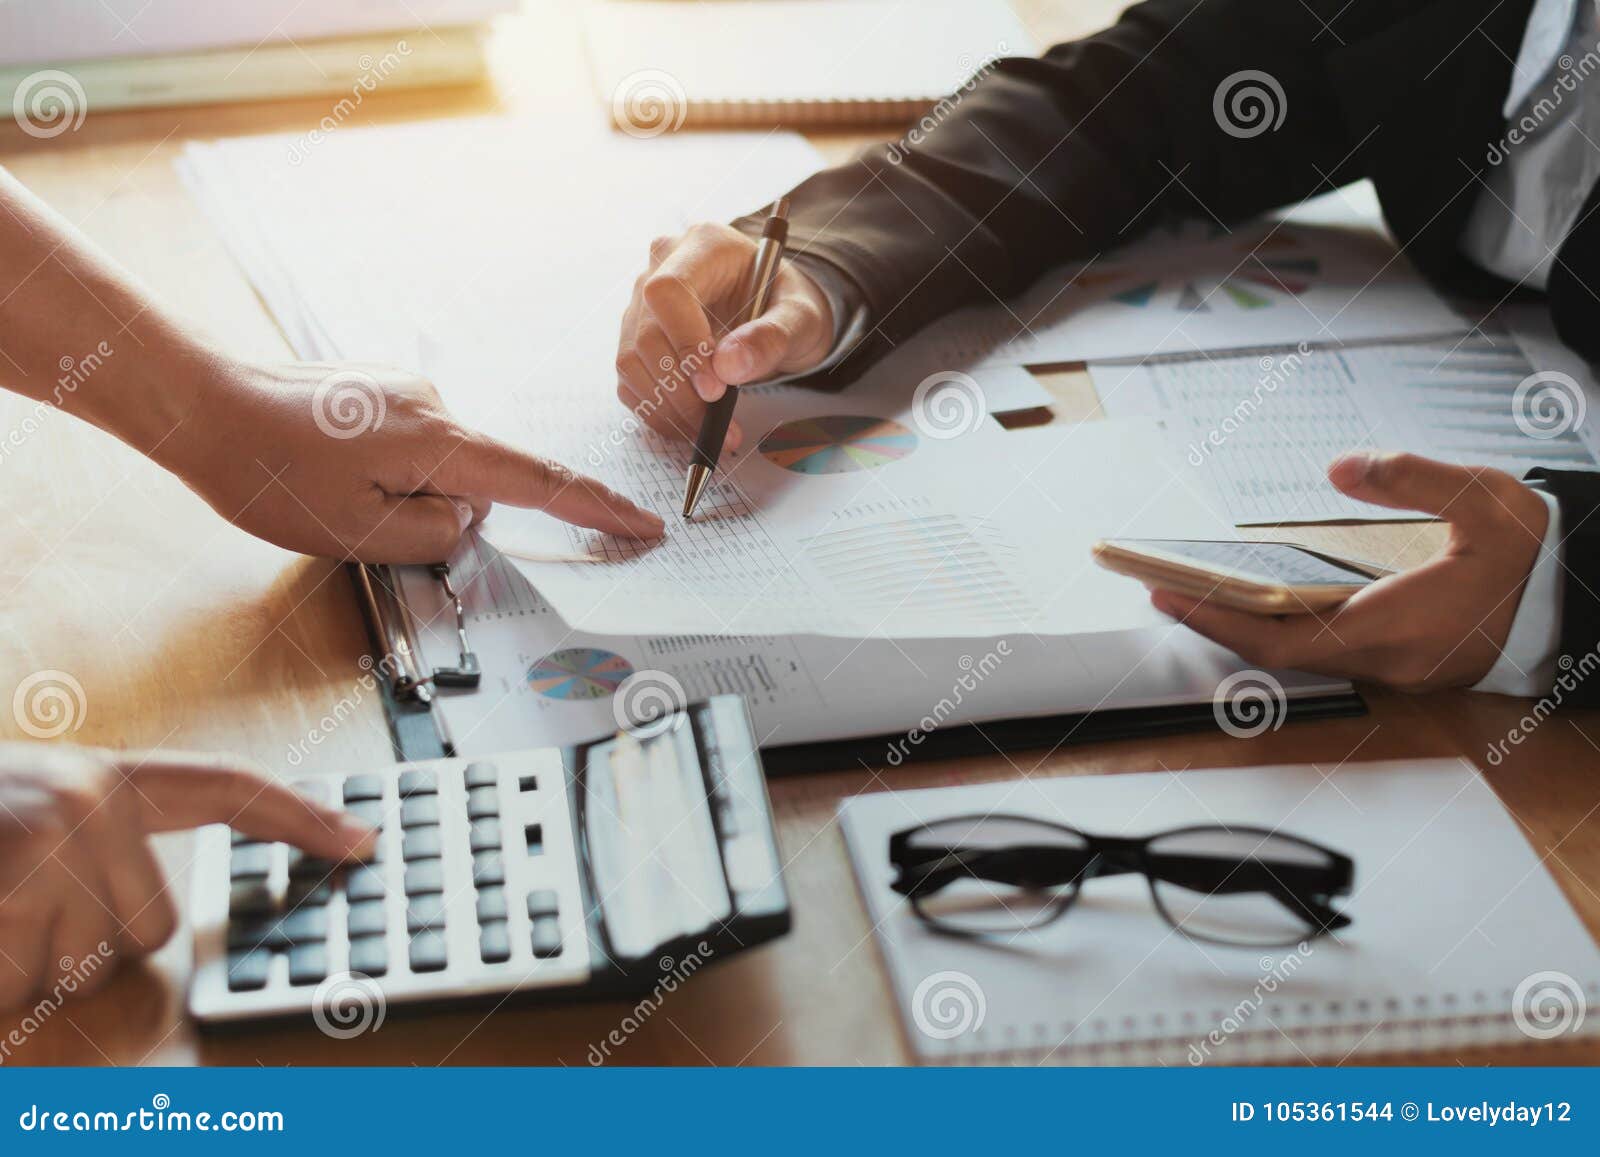 teamwork business woman checking finance report. accounting concept